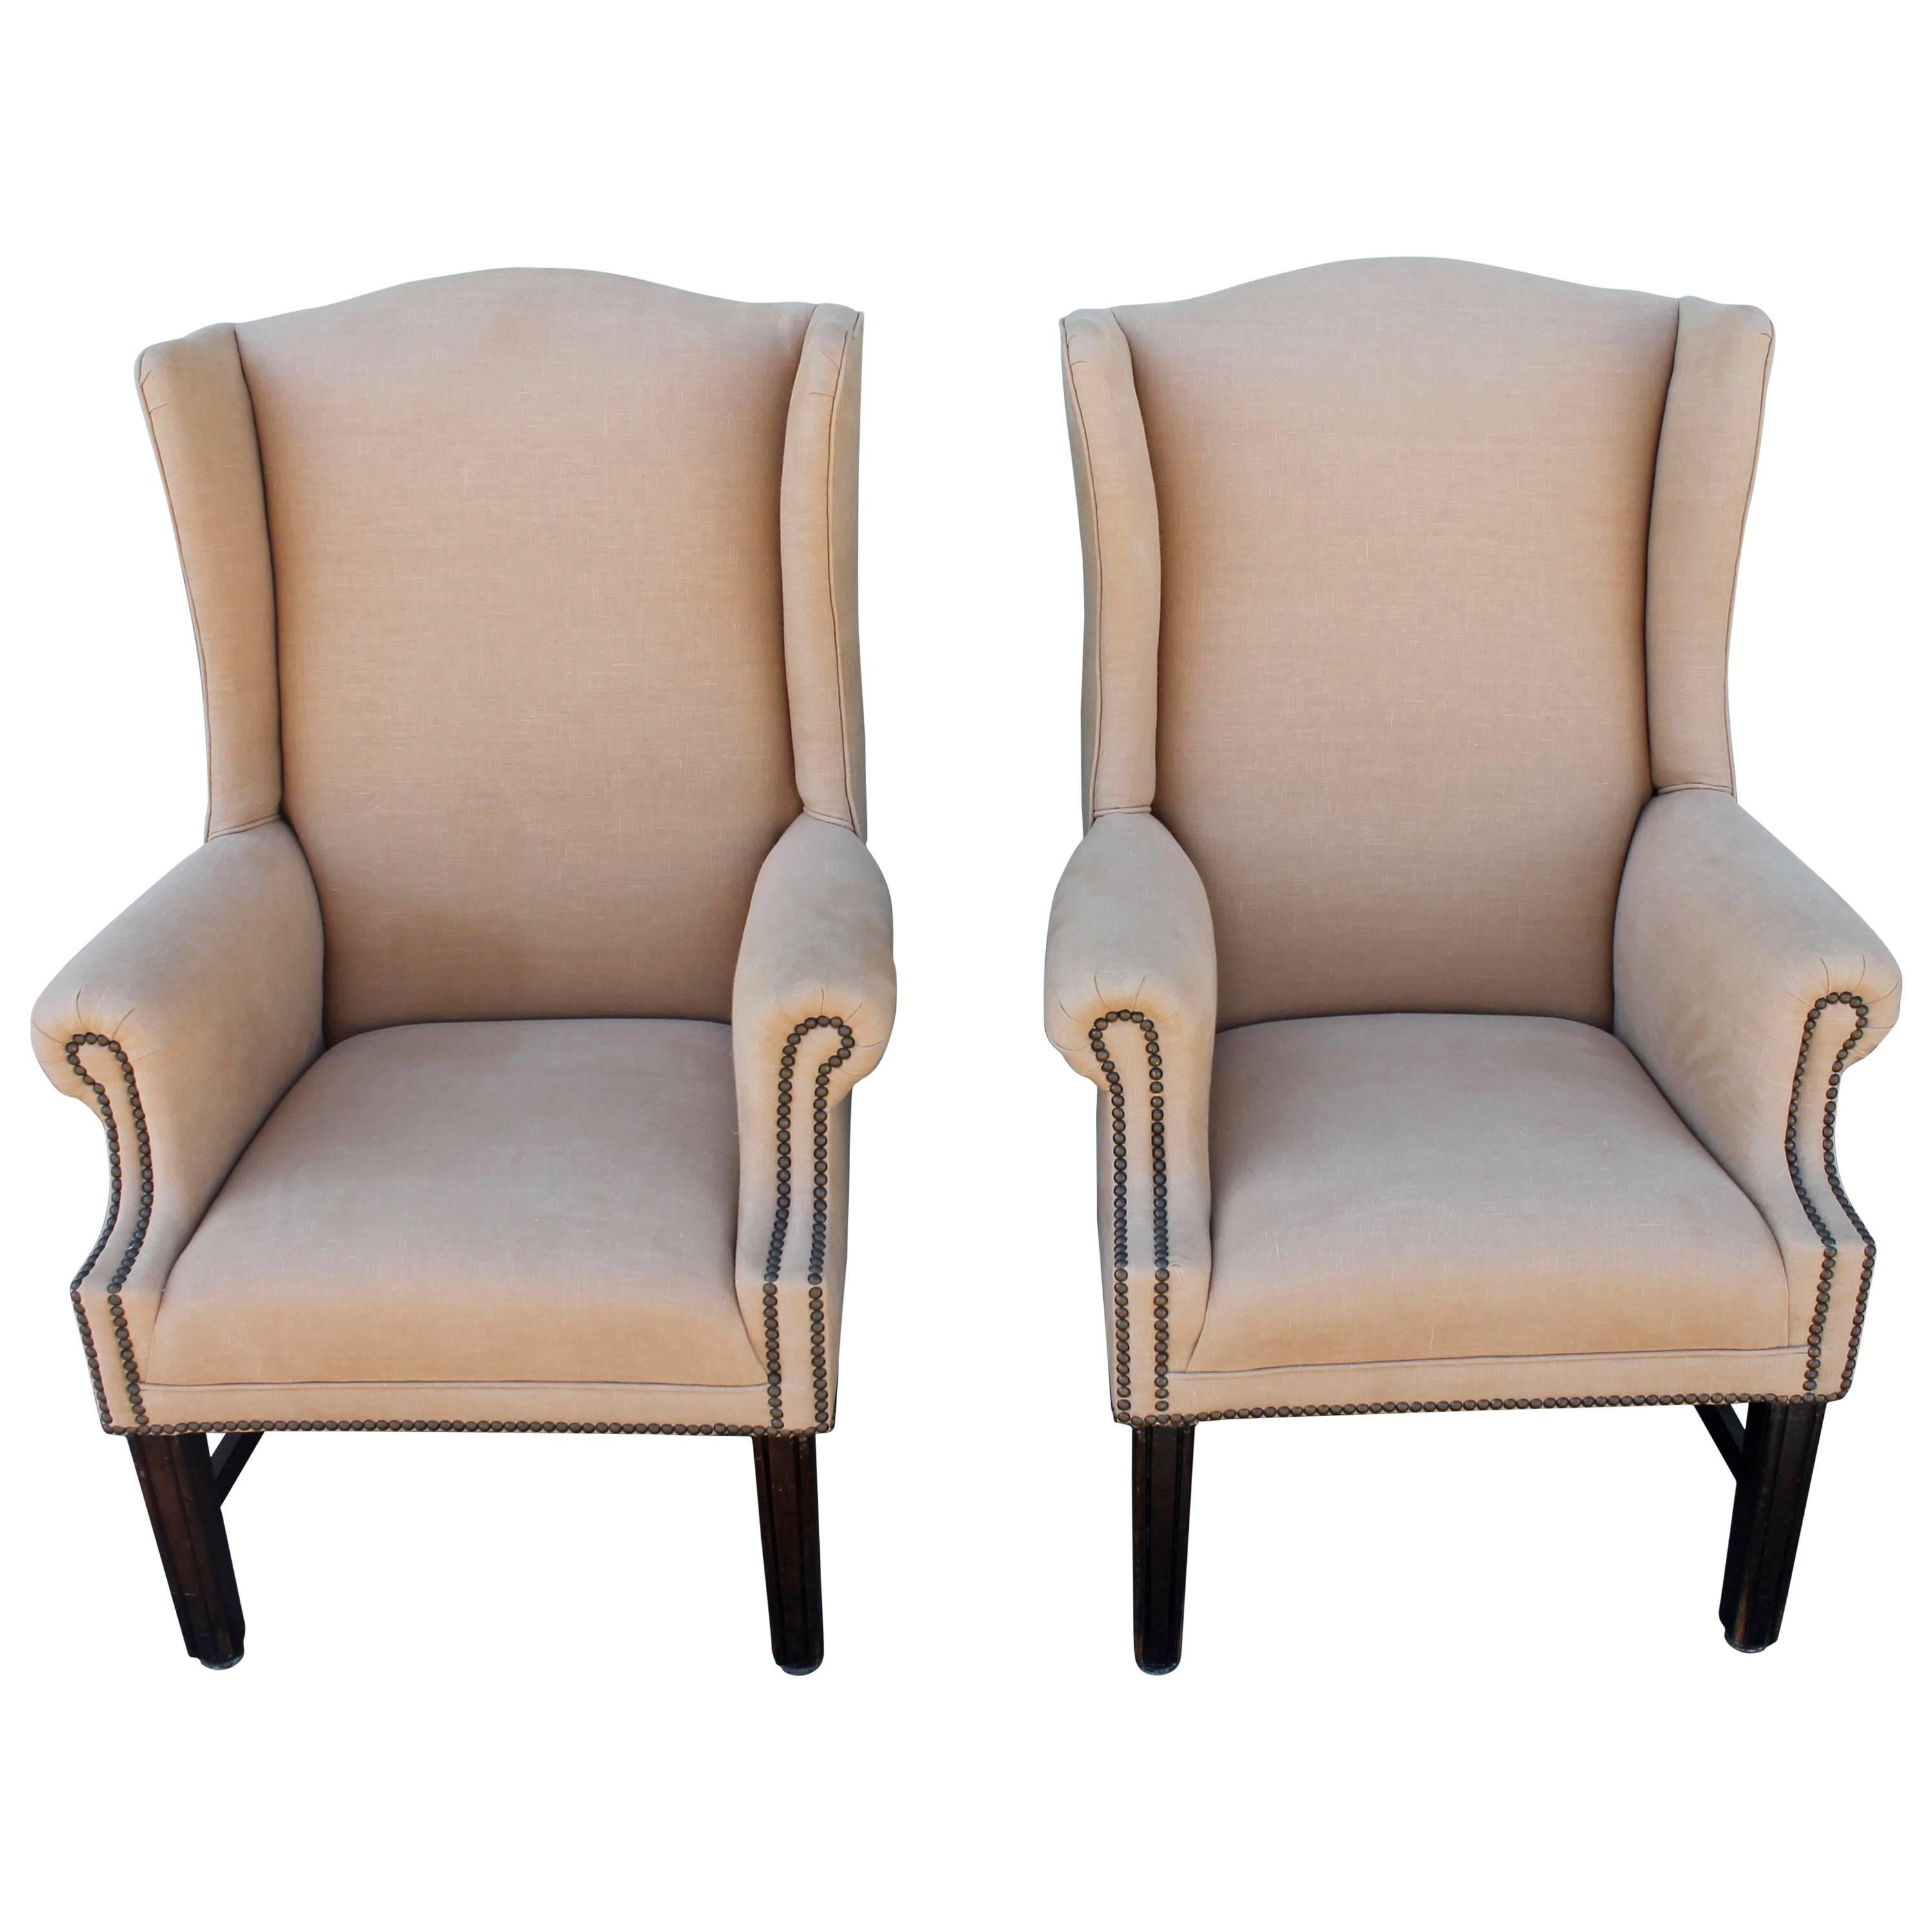 Pair of Fantastic 1920s Wing Chairs in Camel Linen